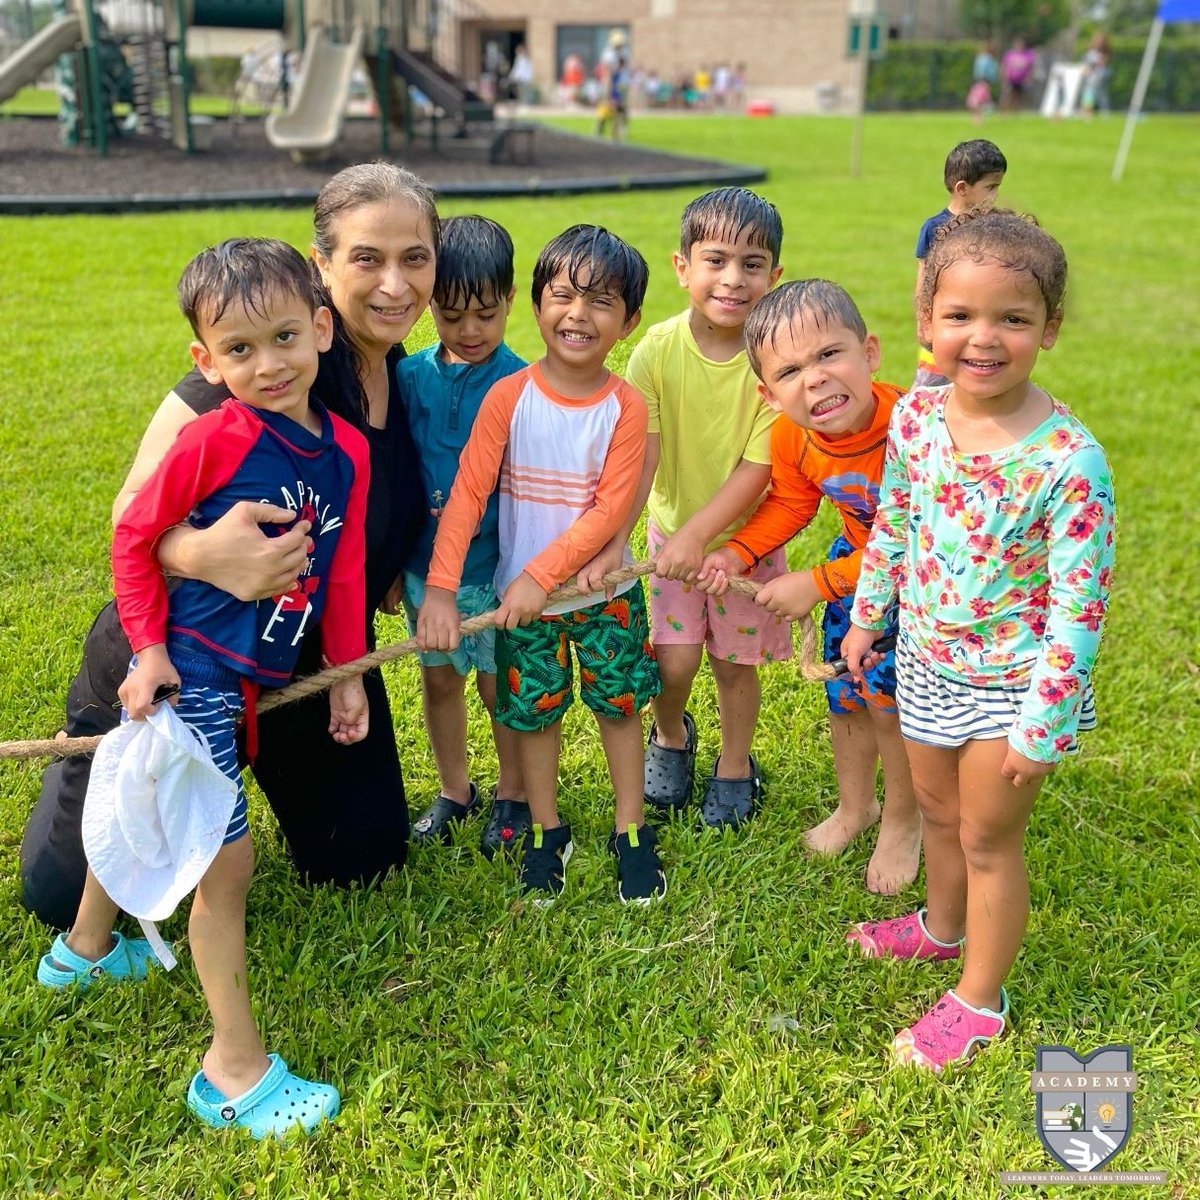 More MRA Field Day fun...and more to come #MRASugarLand #GrowWithMRA #SugarLandPrivateEducation #MontessoriEducation #ReggioEmilia #EarlyChildhoodEducation #CogniaAccredited #Cognia #HoustonsBest #HoustonsBestOfTheBest #TPSA